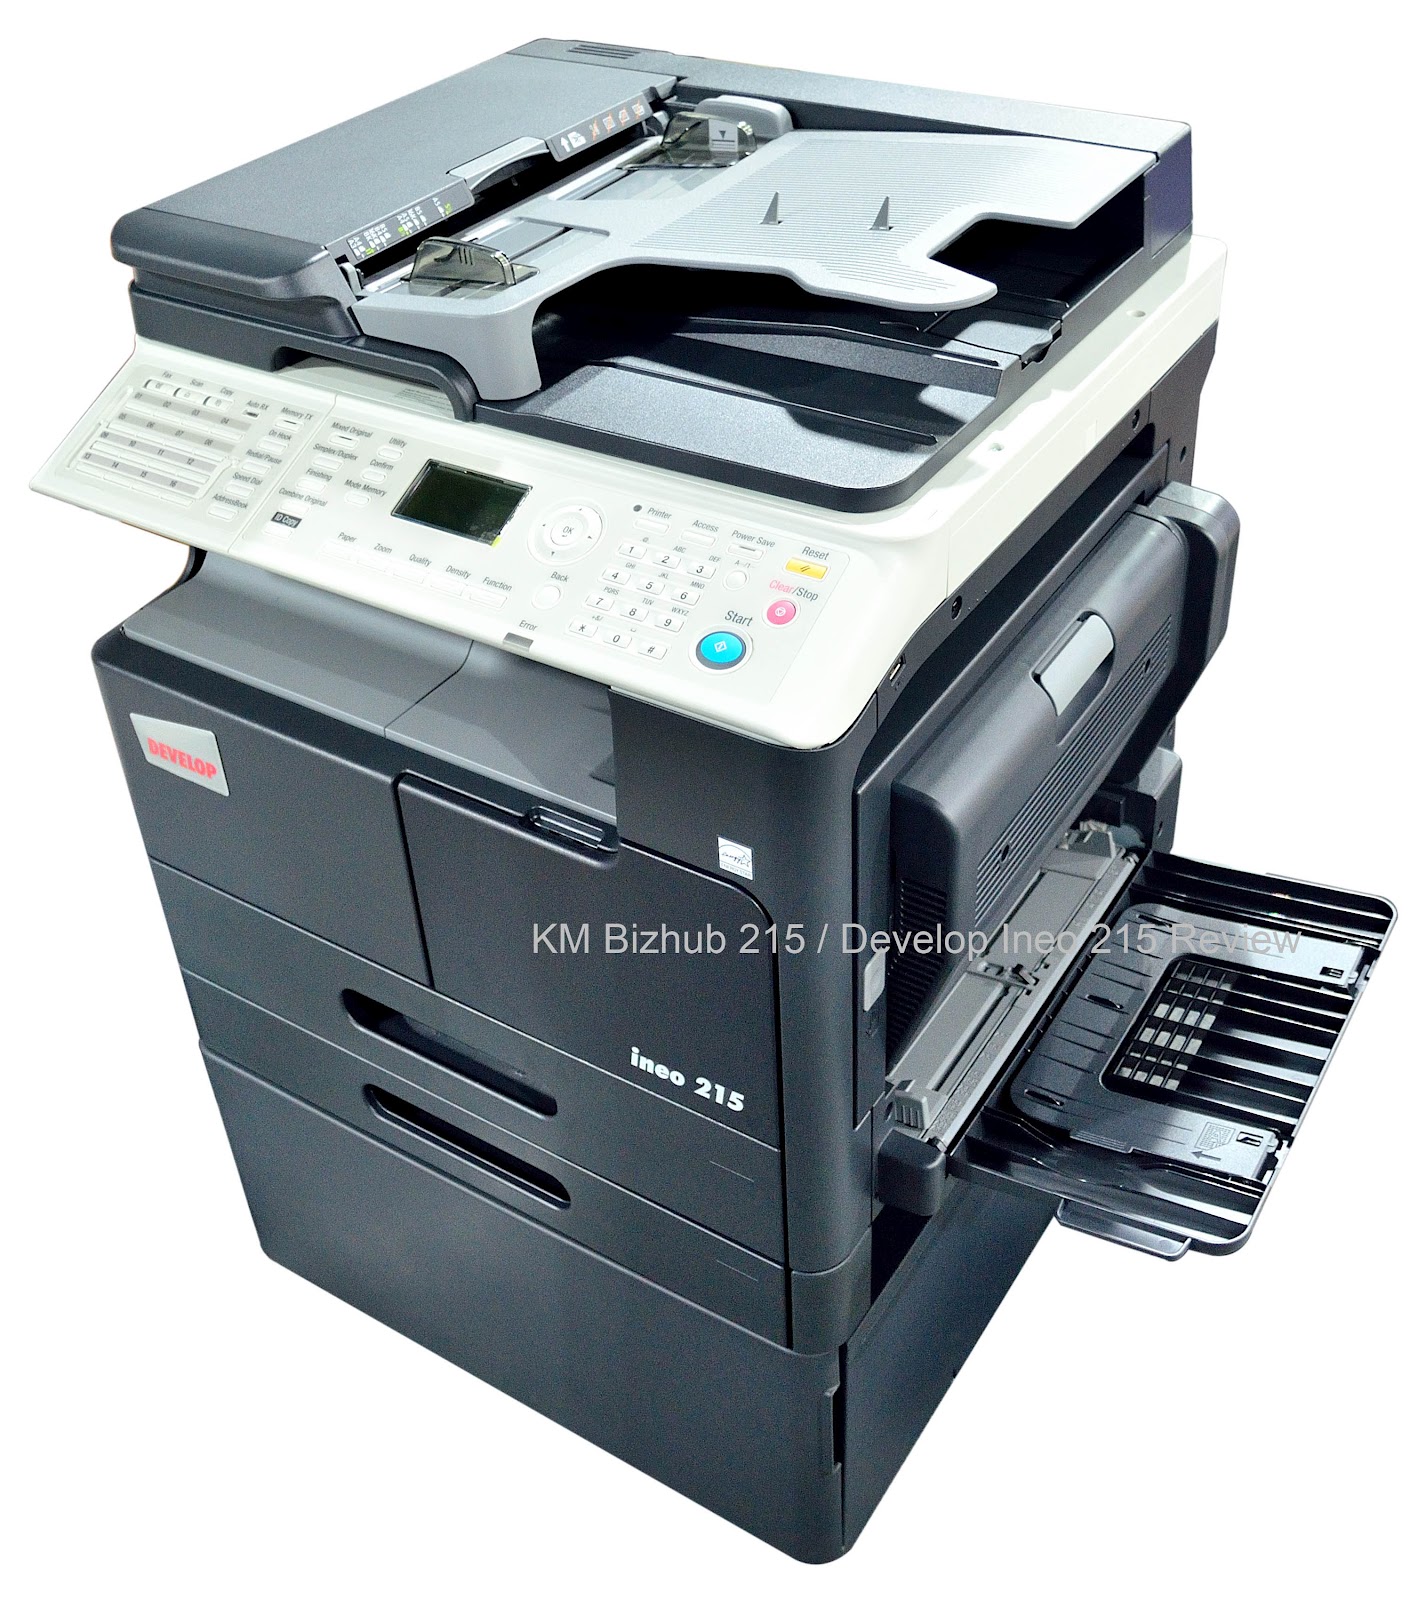 All About Copiers And Printers Konica Minolta Bizhub 215 Develop Ineo 215 Review